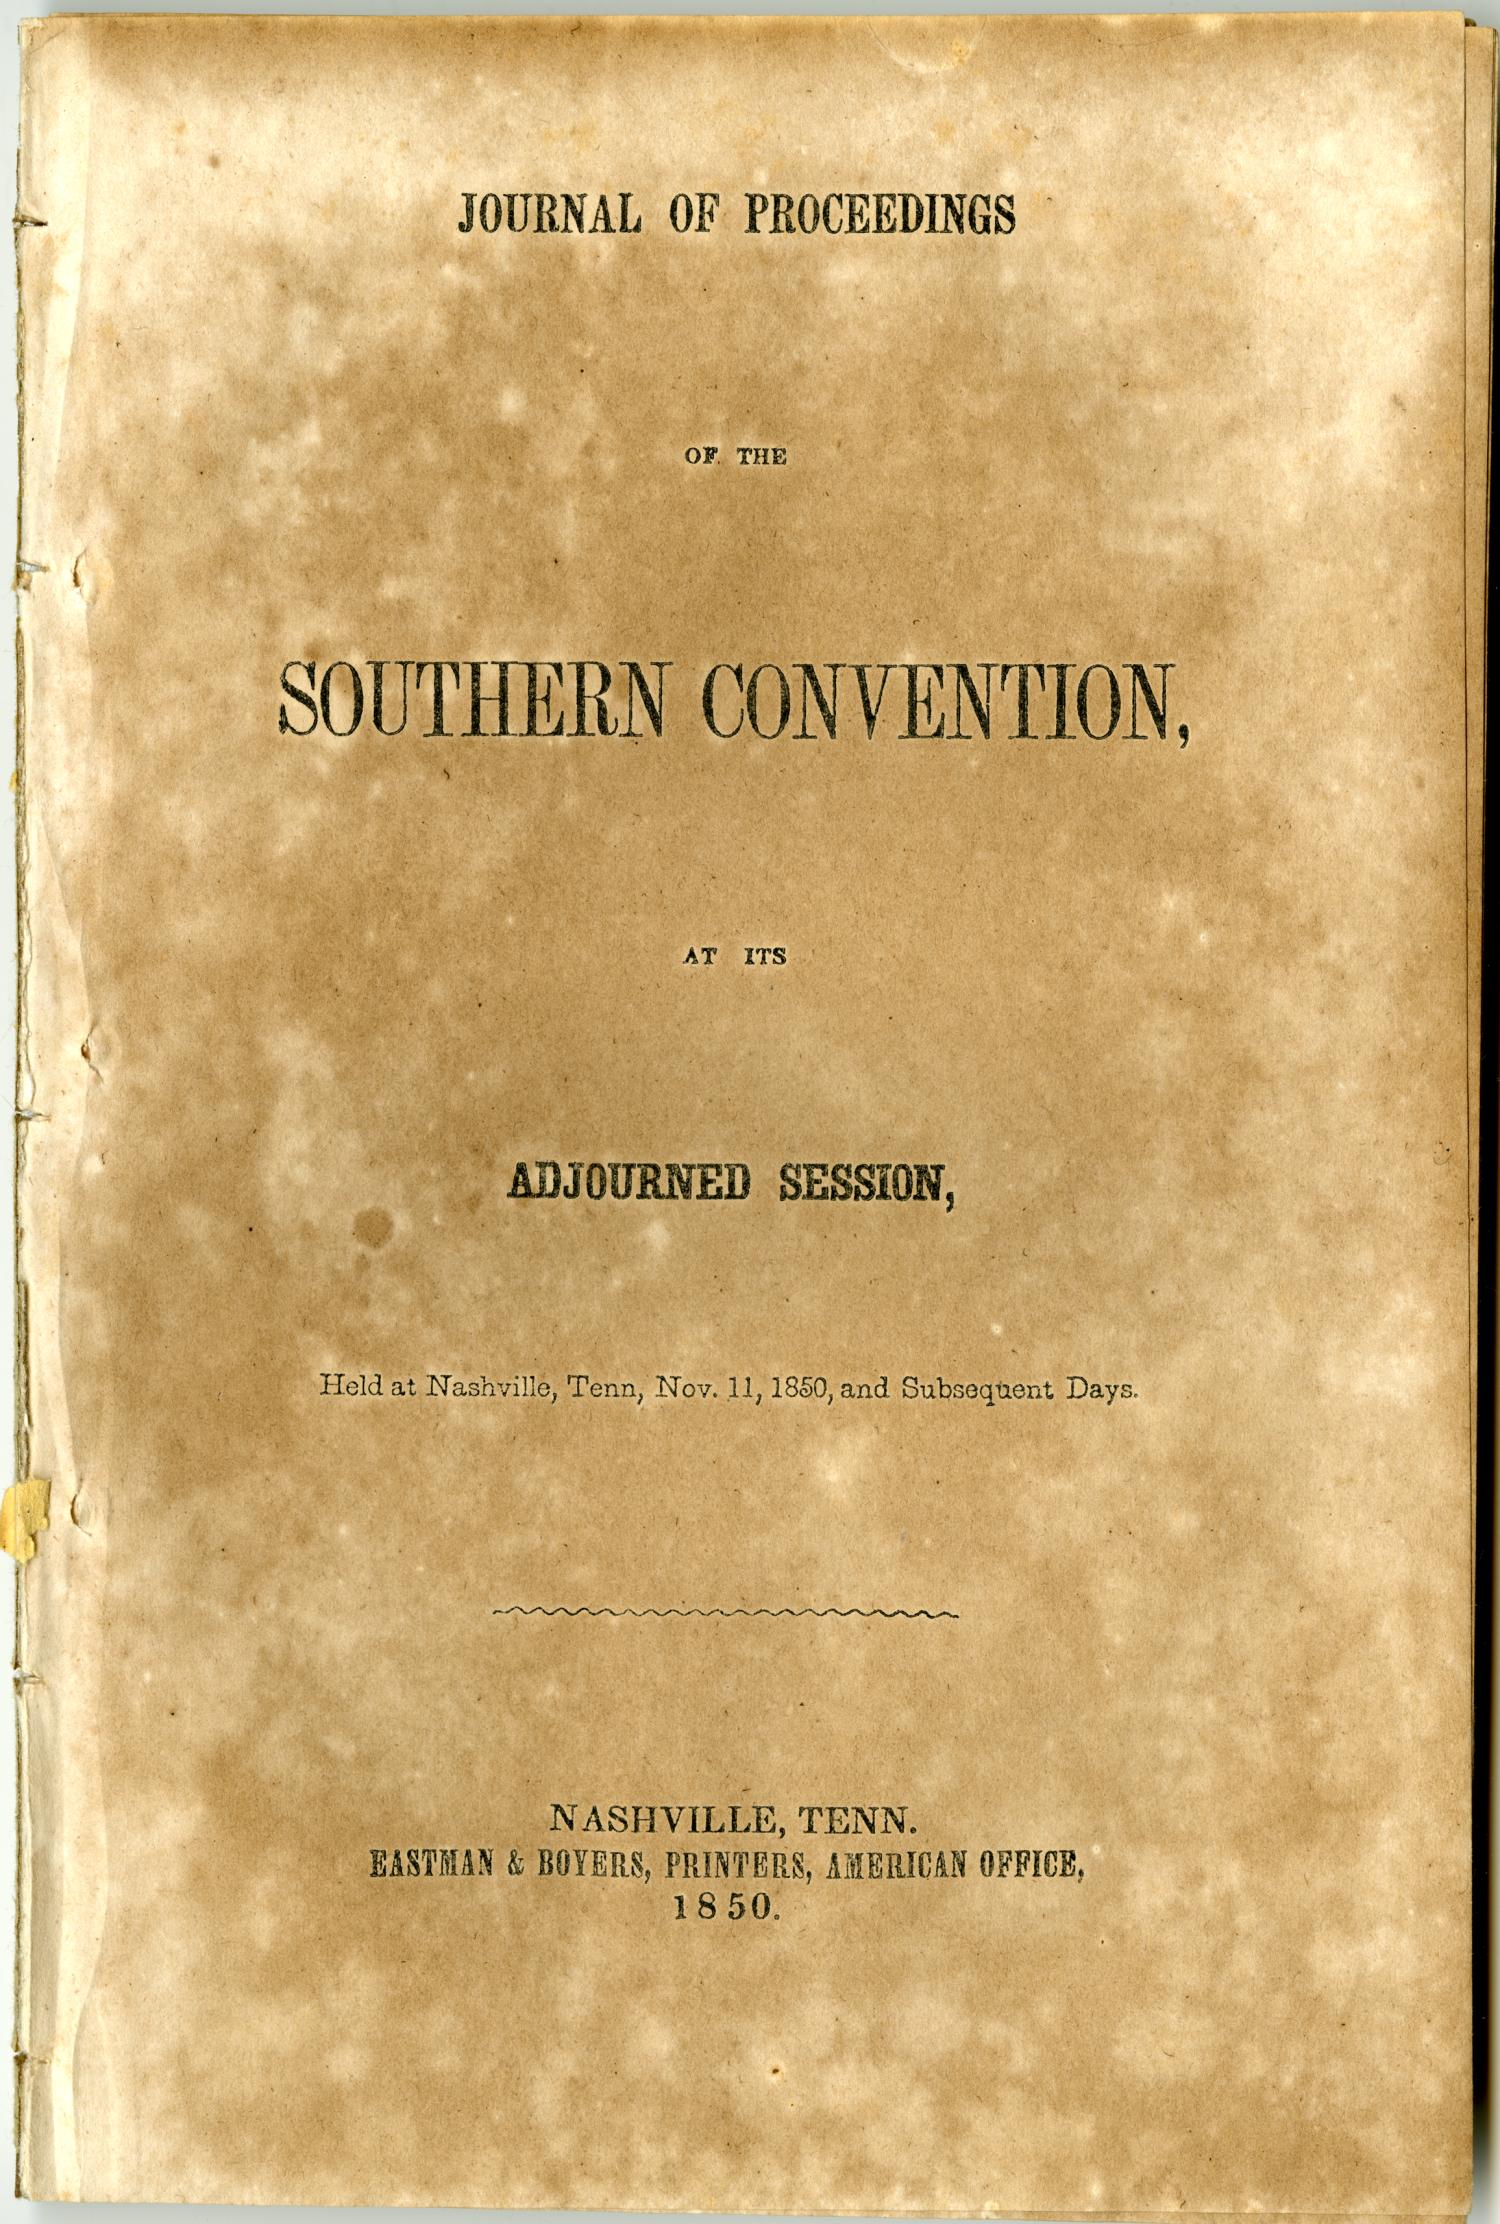 Journal of proceedings of the Southern Convention, at its adjourned session : held at Nashville, Tenn., Nov. 11, 1850, and subsequent days.
                                                
                                                    [Sequence #]: 1 of 36
                                                